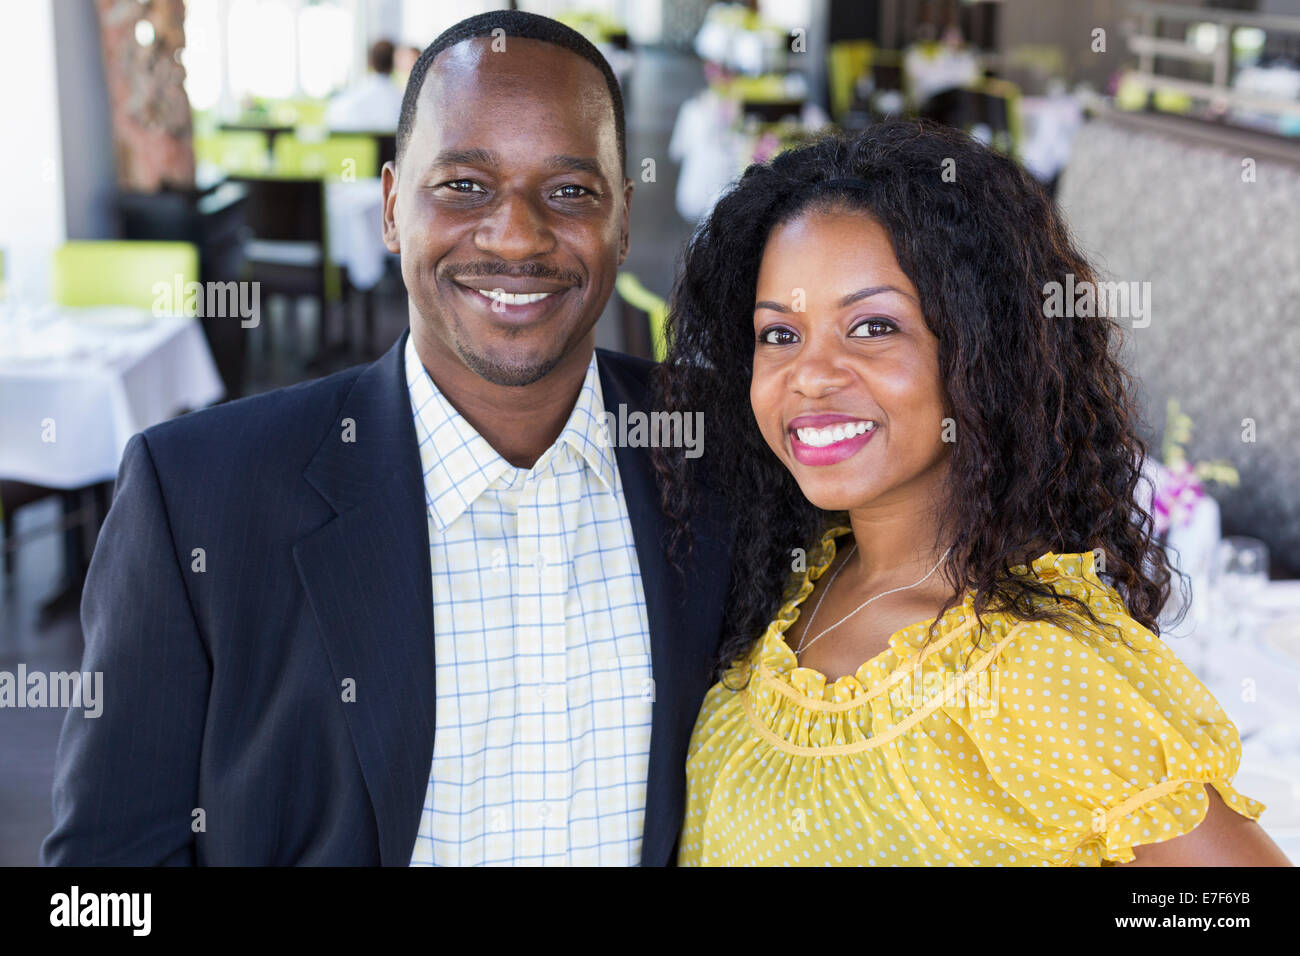 African American couple smiling in restaurant Banque D'Images